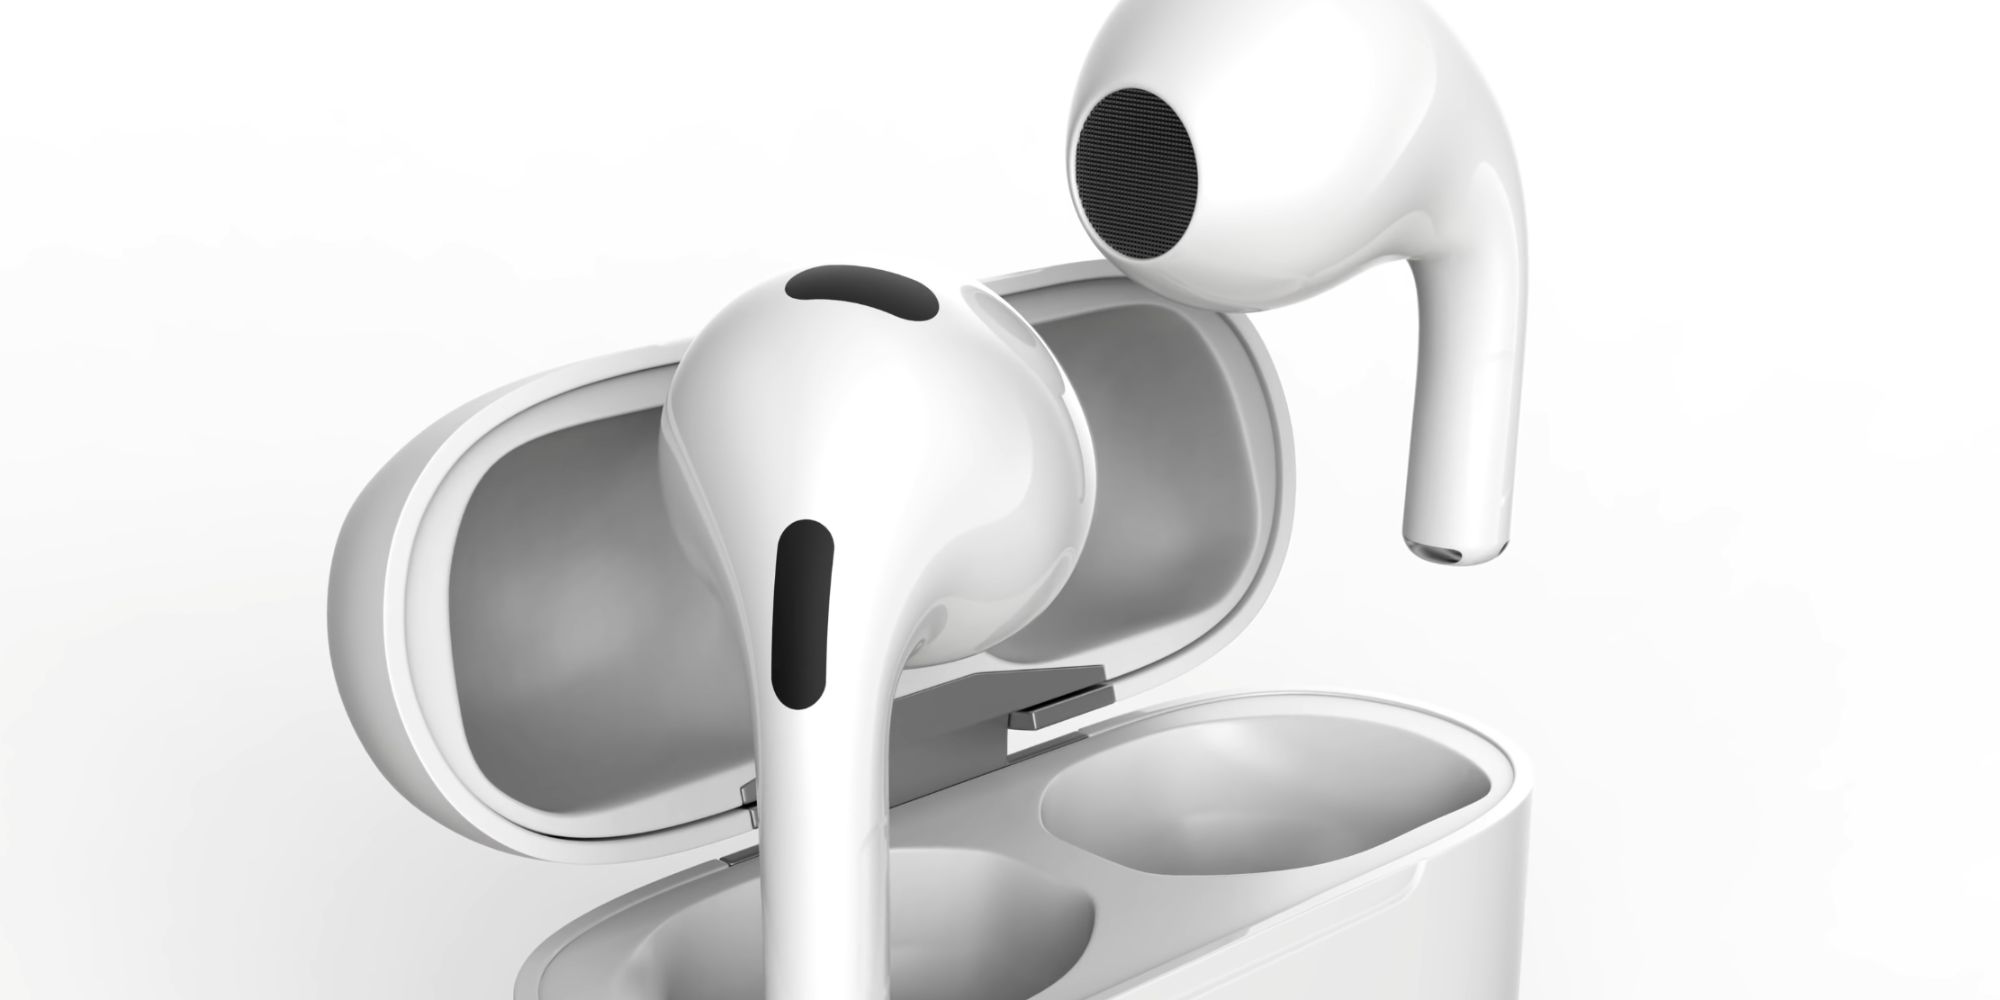 Concept render of Apple AirPods 3